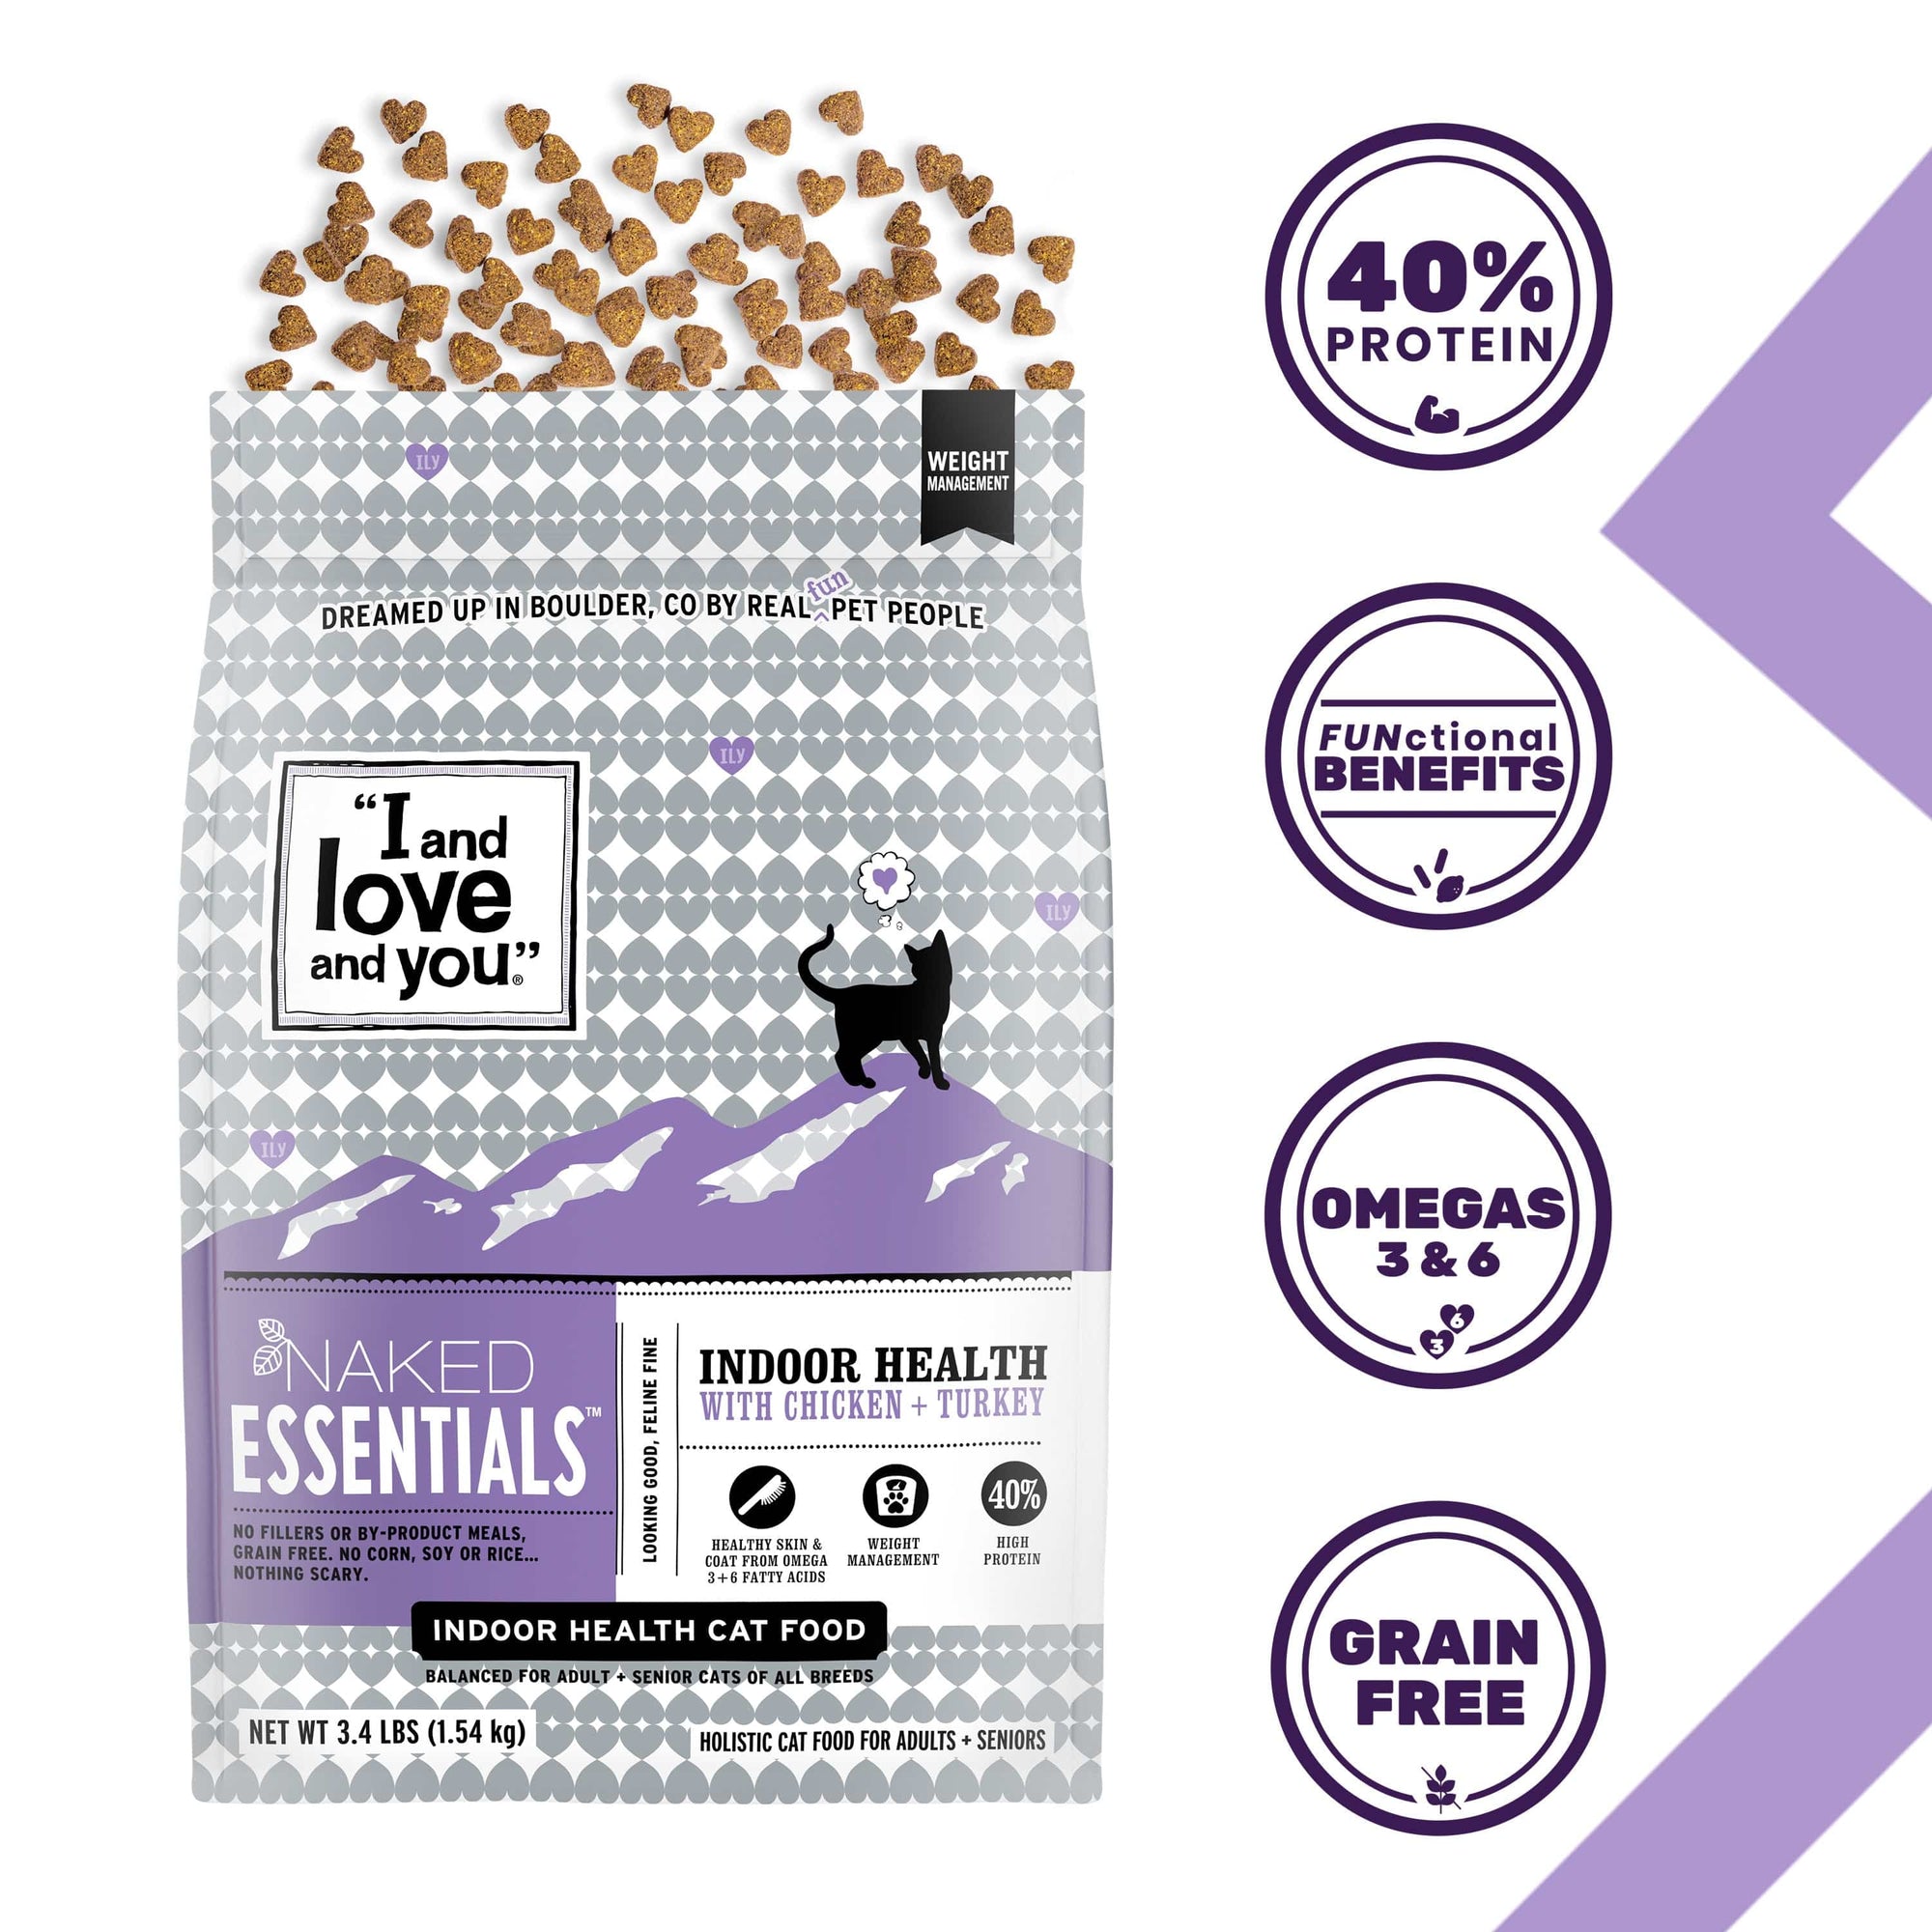 A bag of cat food featuring Naked Essentials Indoor Health - Chicken + Turkey kibble for your feline friend.